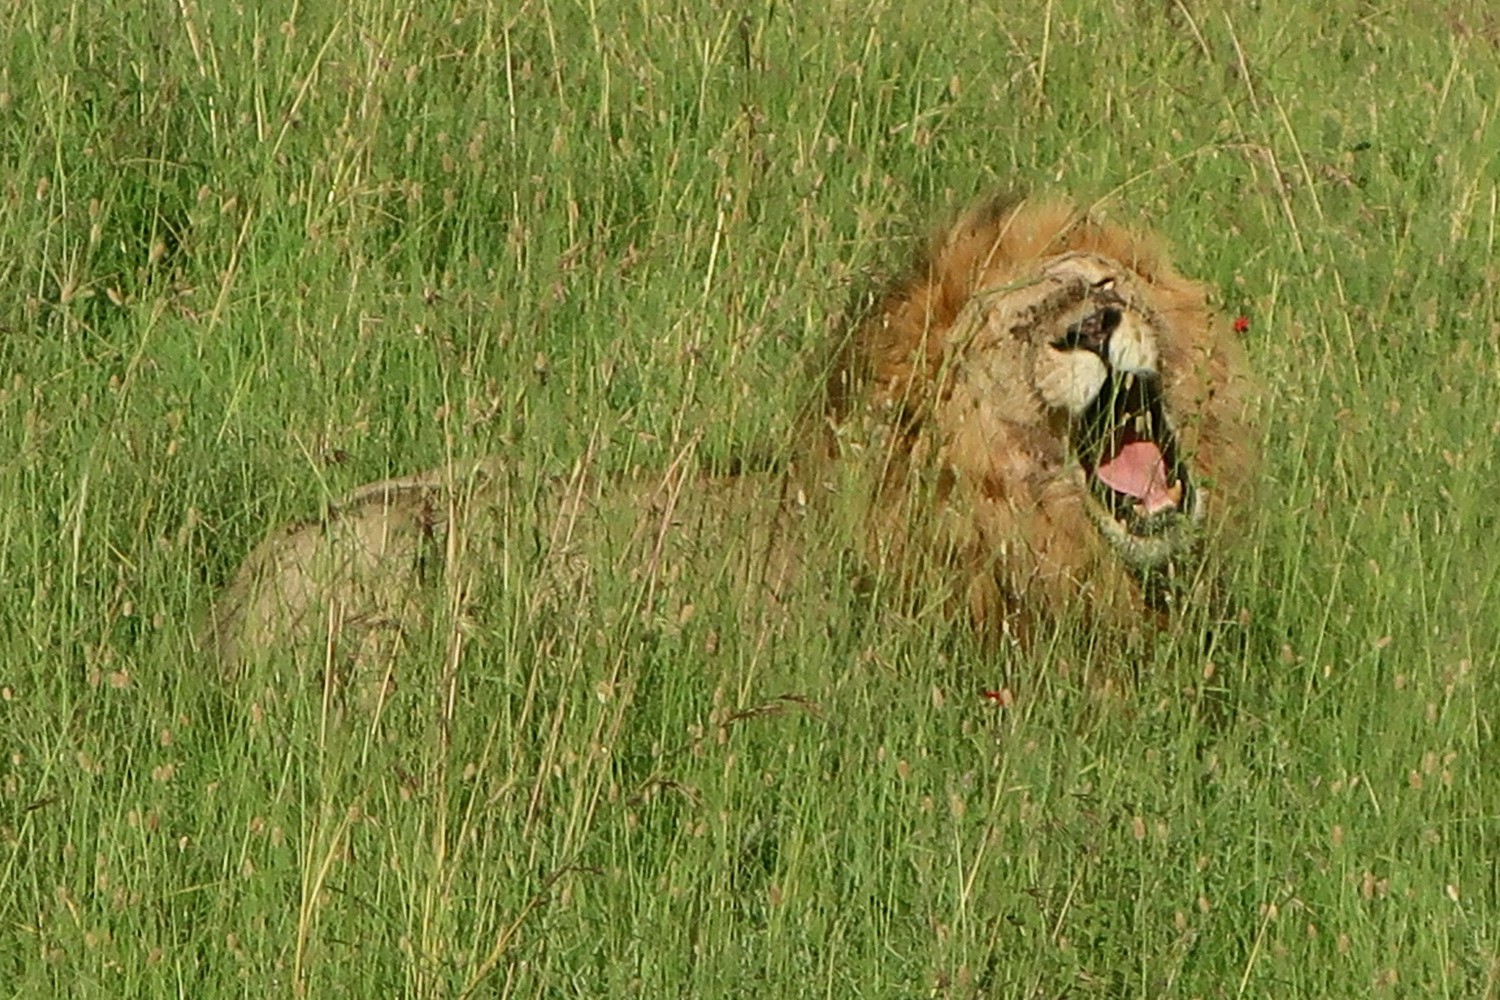 Hungry Lion in the savanna